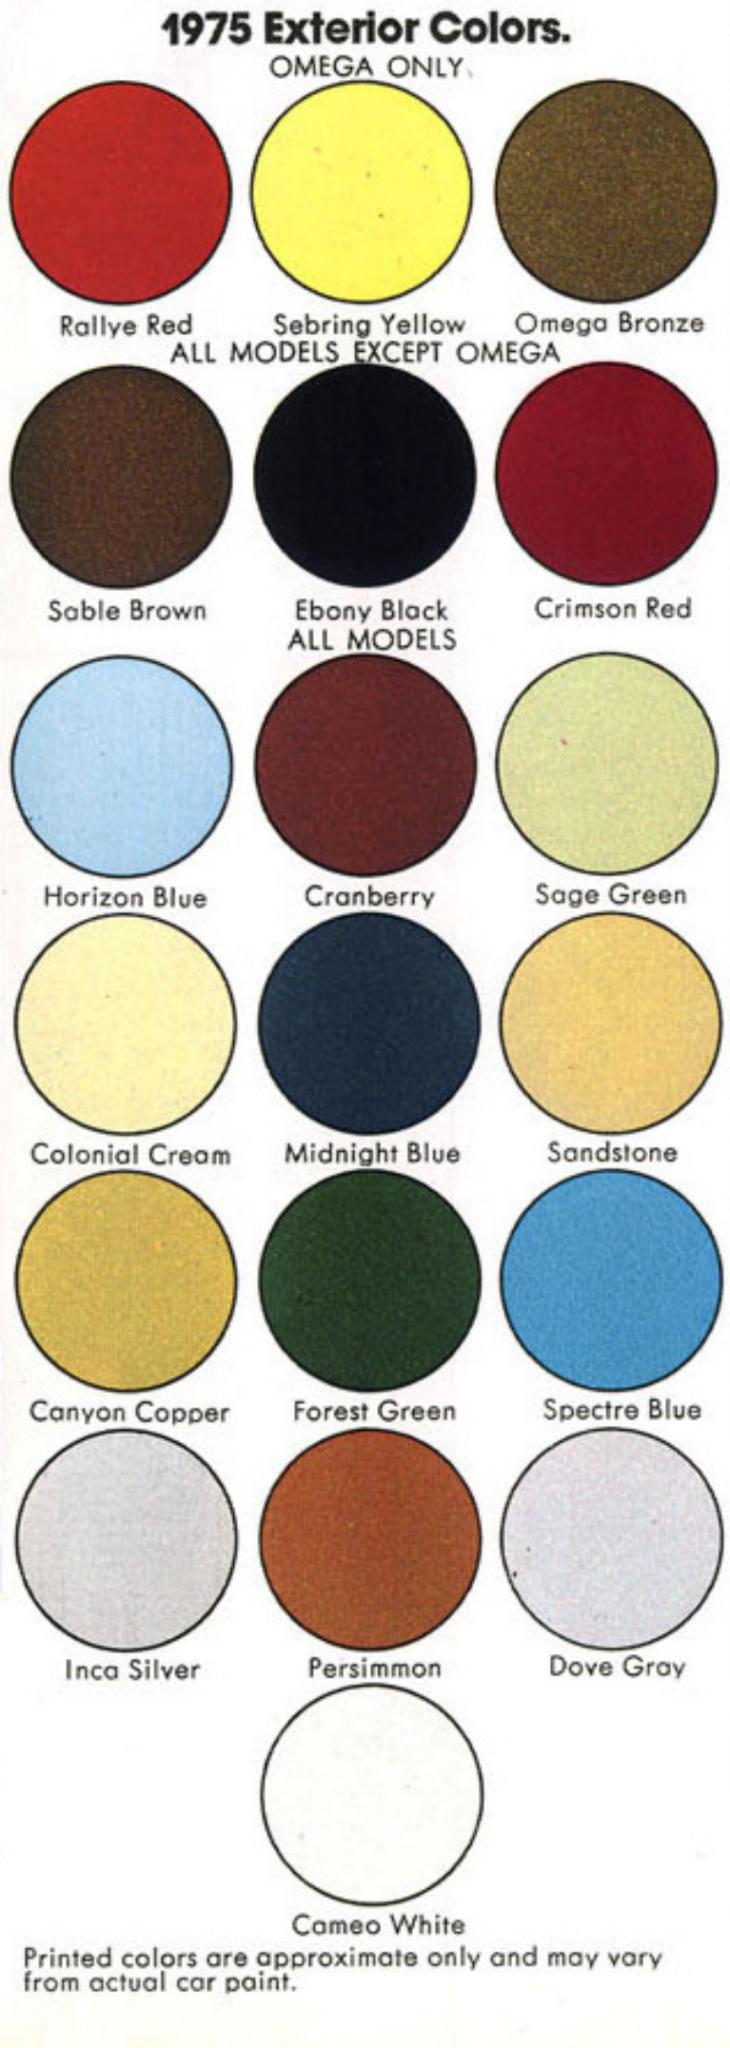 Color Swatches for 1975 oldsmobile vehicles